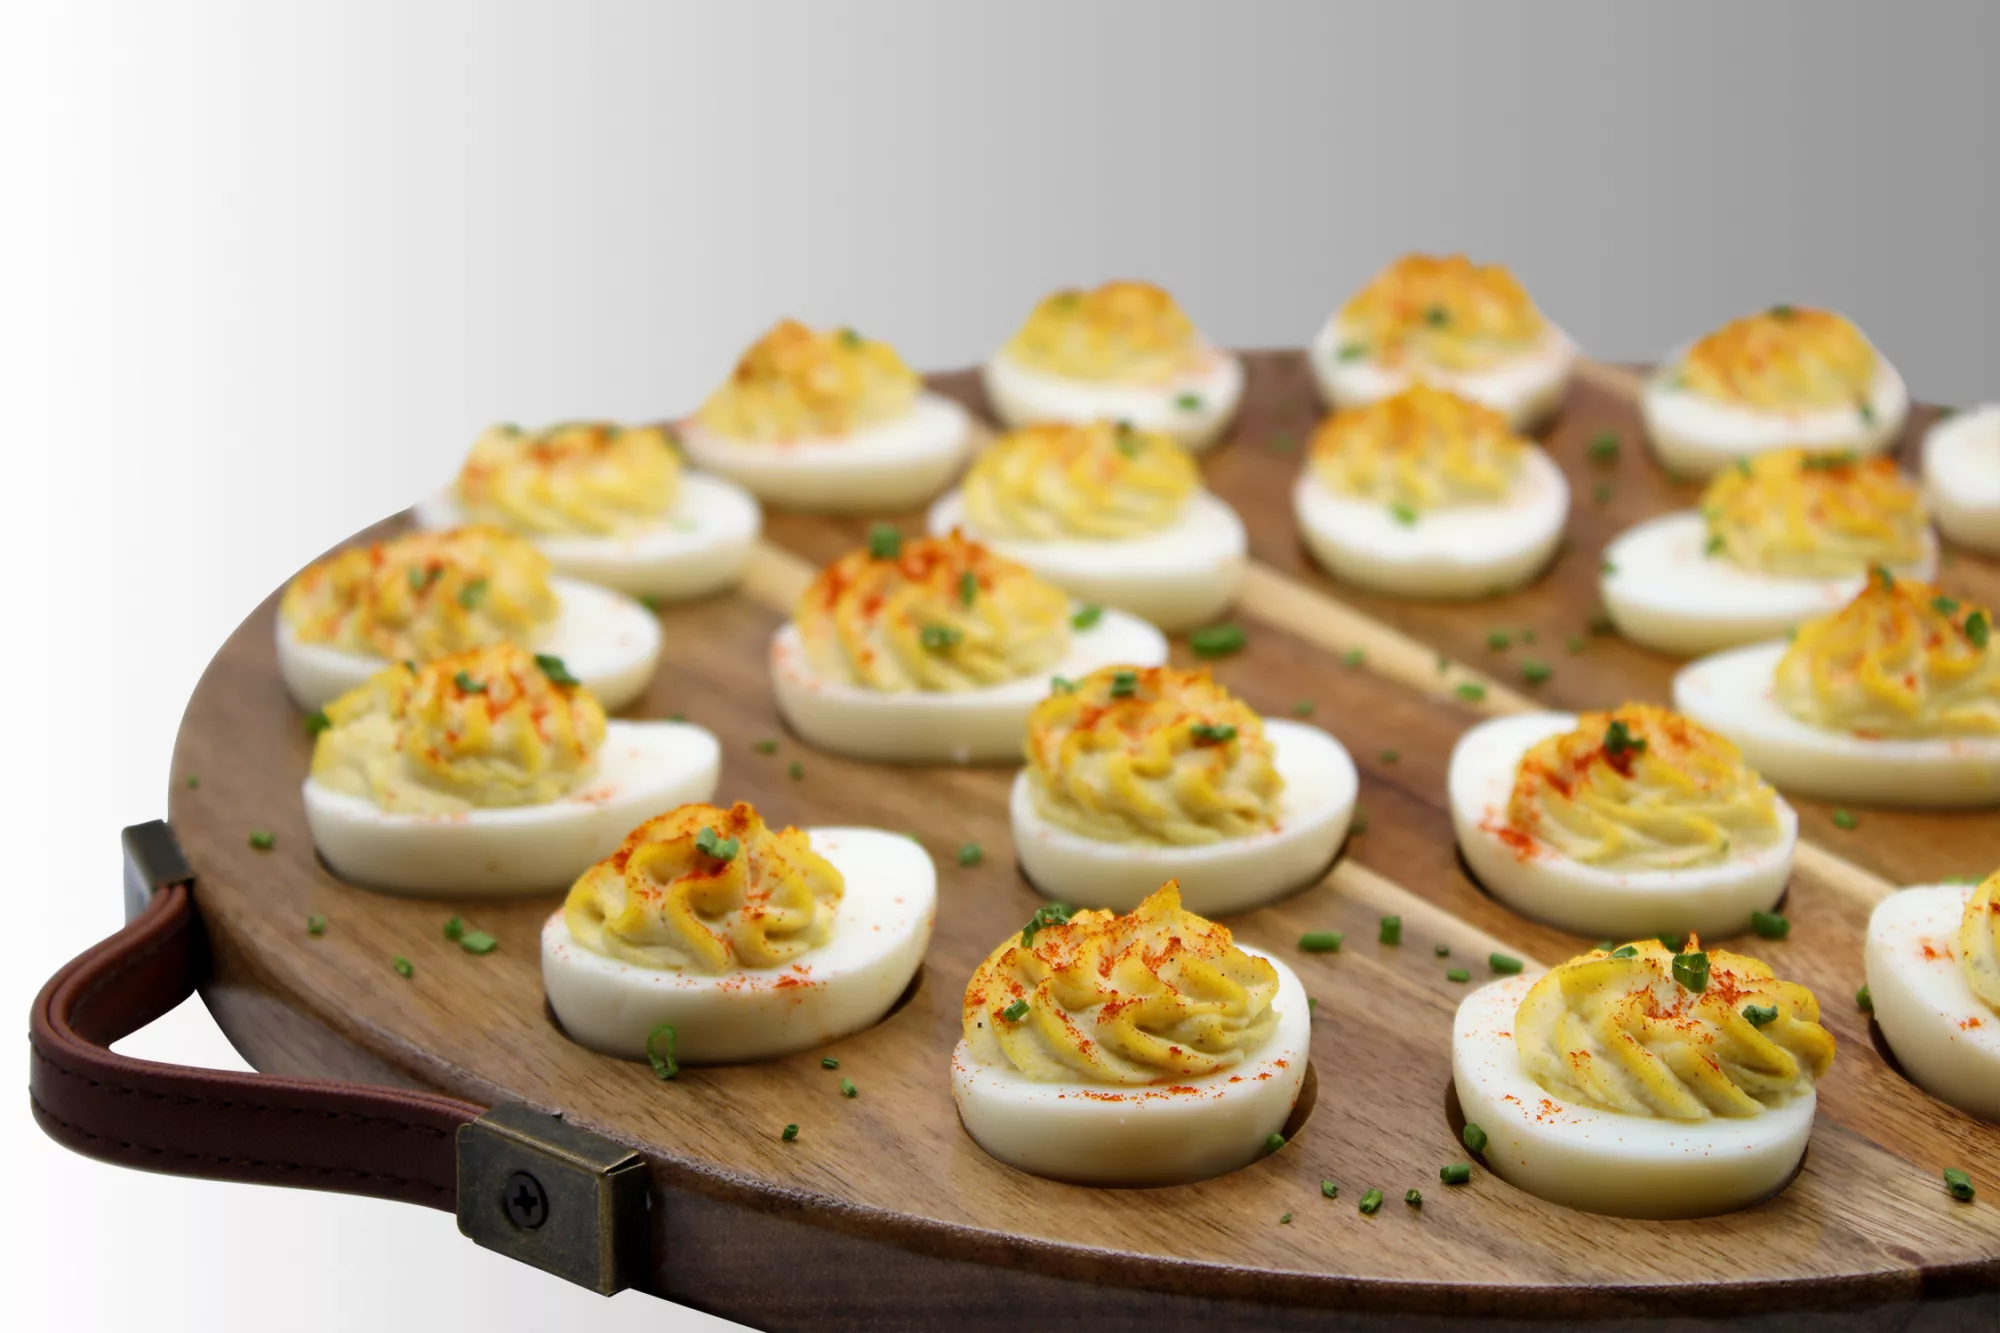 Hard boiled egg whites stuffed with a creamy spiced egg yolk filling. Includes 24 pieces.